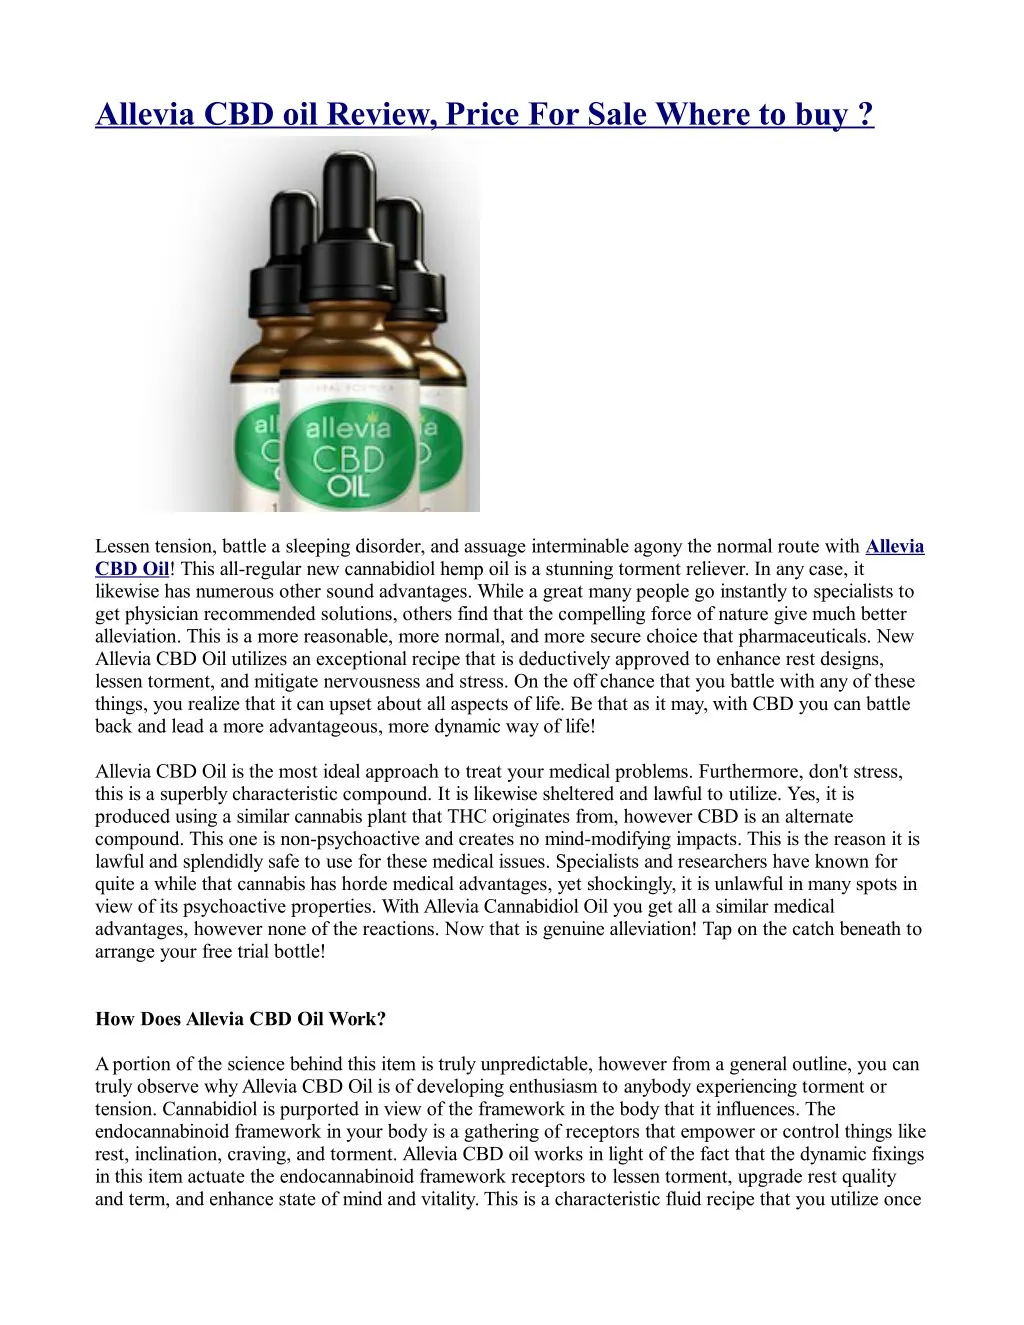 allevia cbd oil review price for sale where to buy